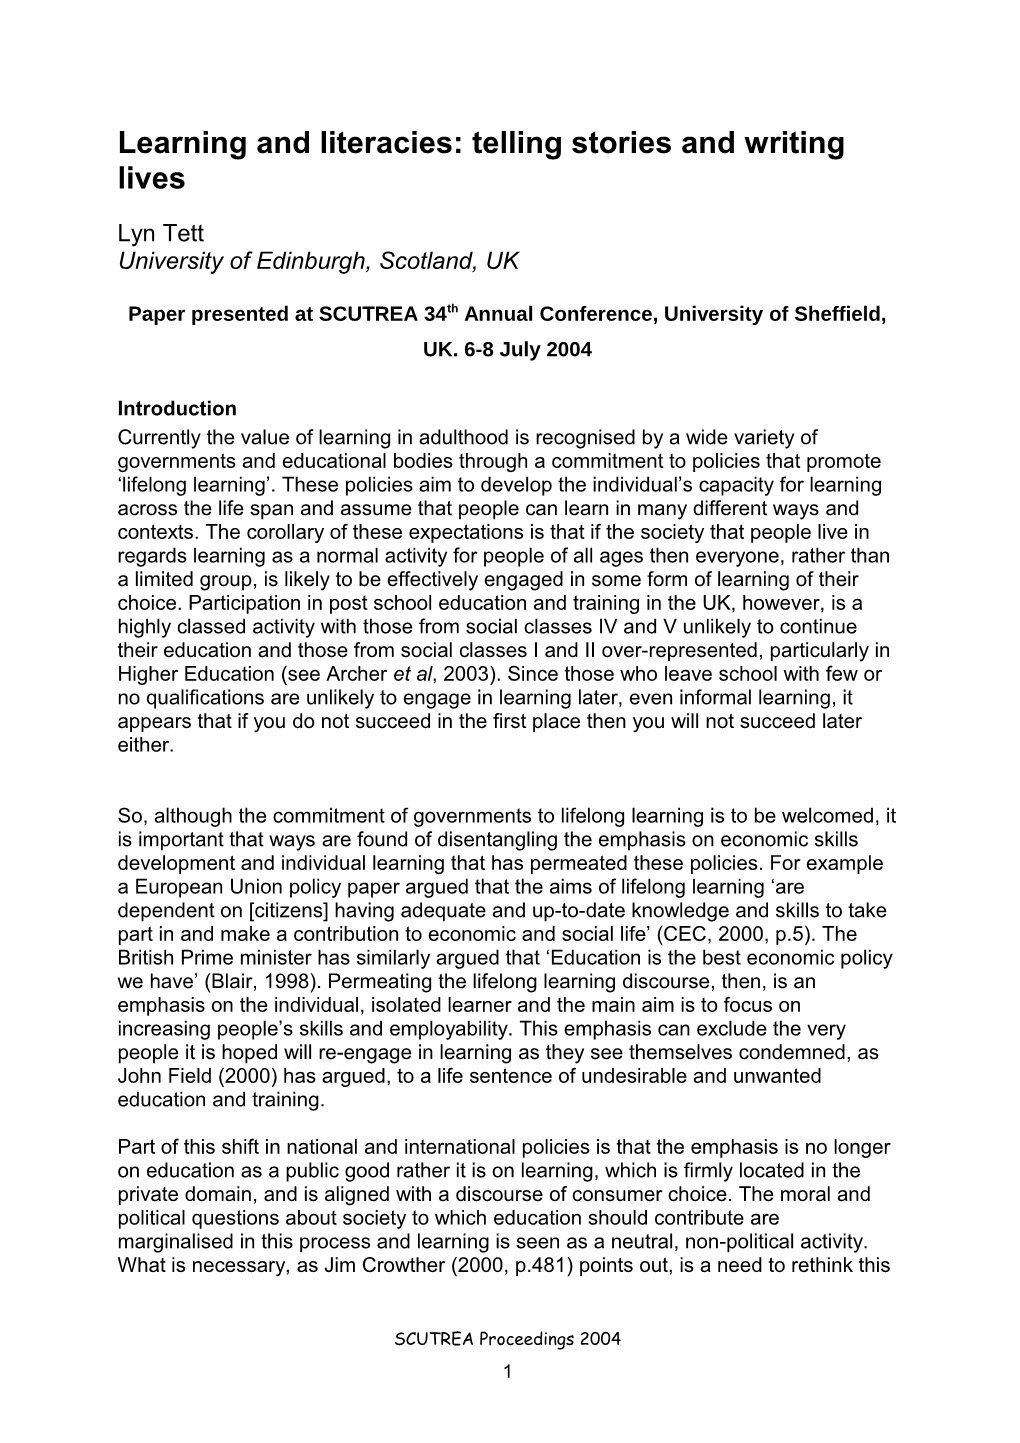 Paper Presented at SCUTREA 34Th Annual Conference, University of Sheffield, UK